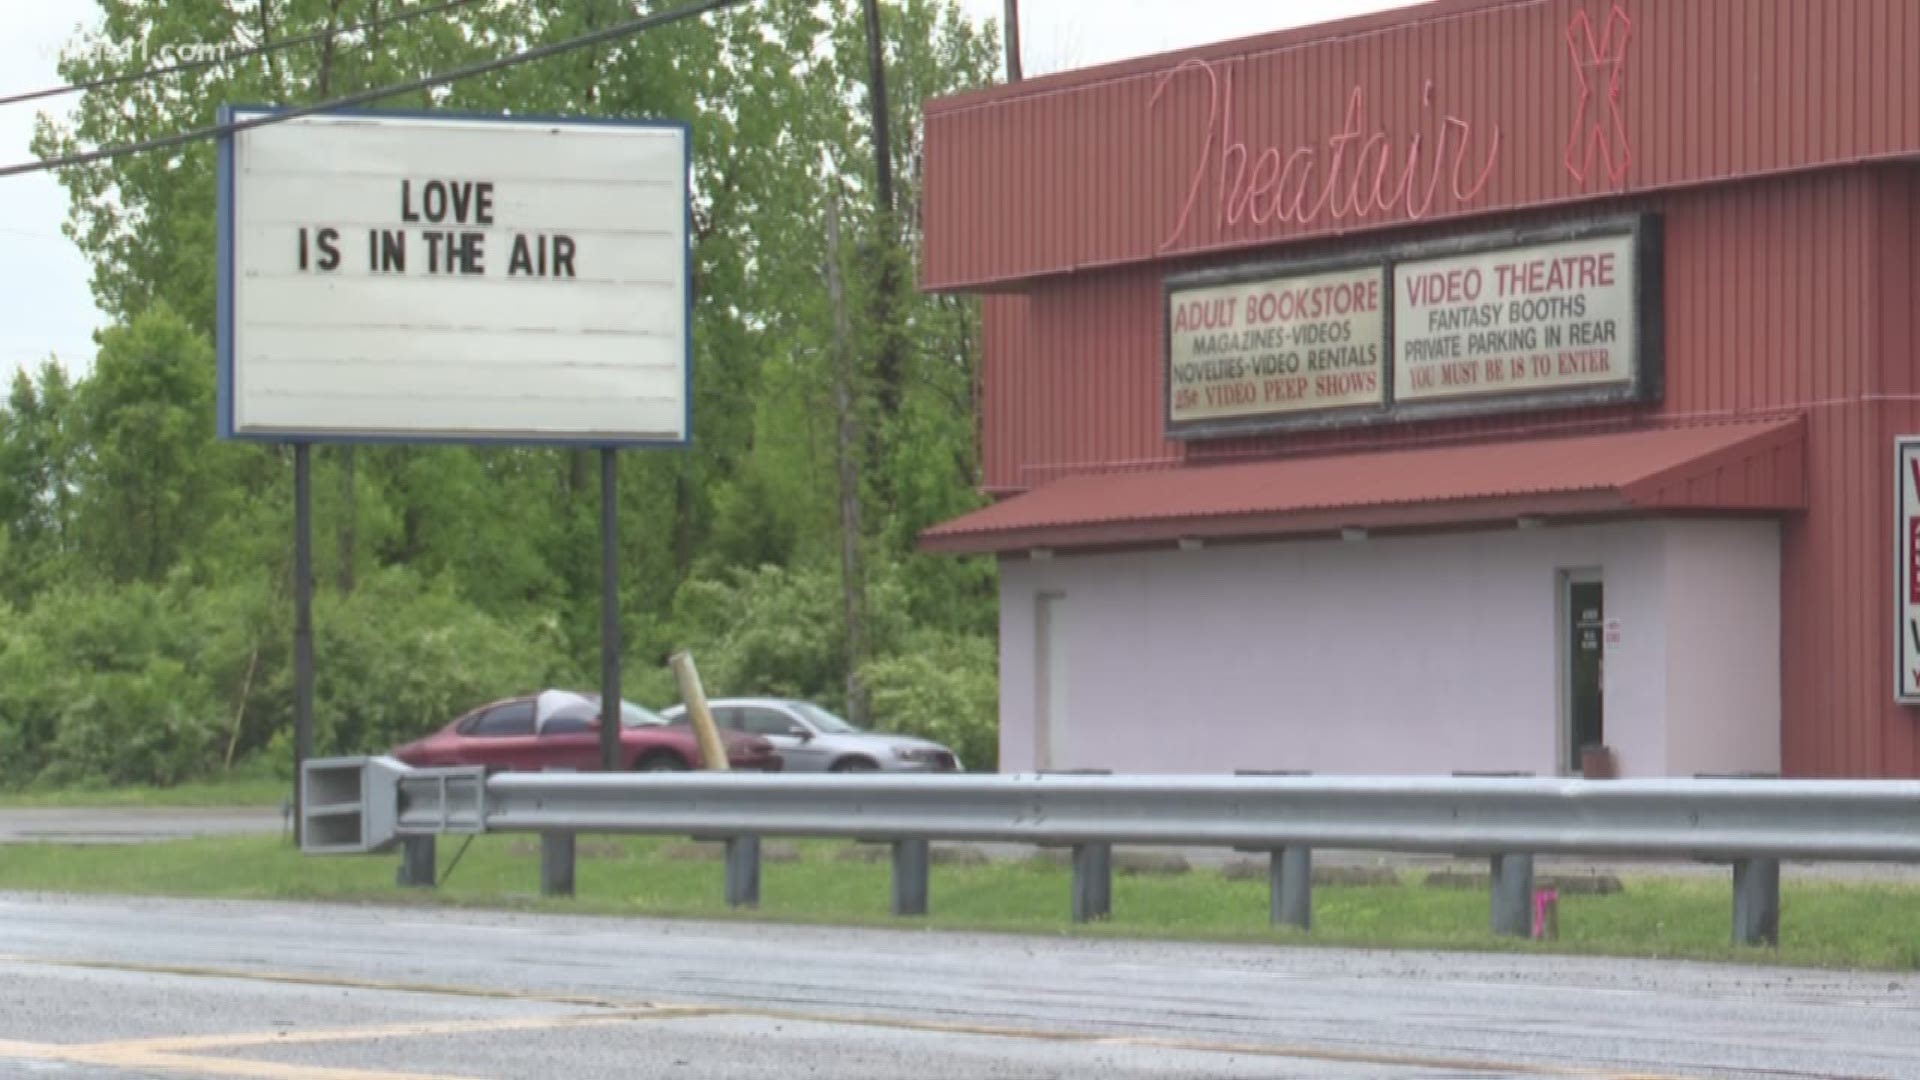 Theataire X has been a controversial business, but a mainstay on US 31.